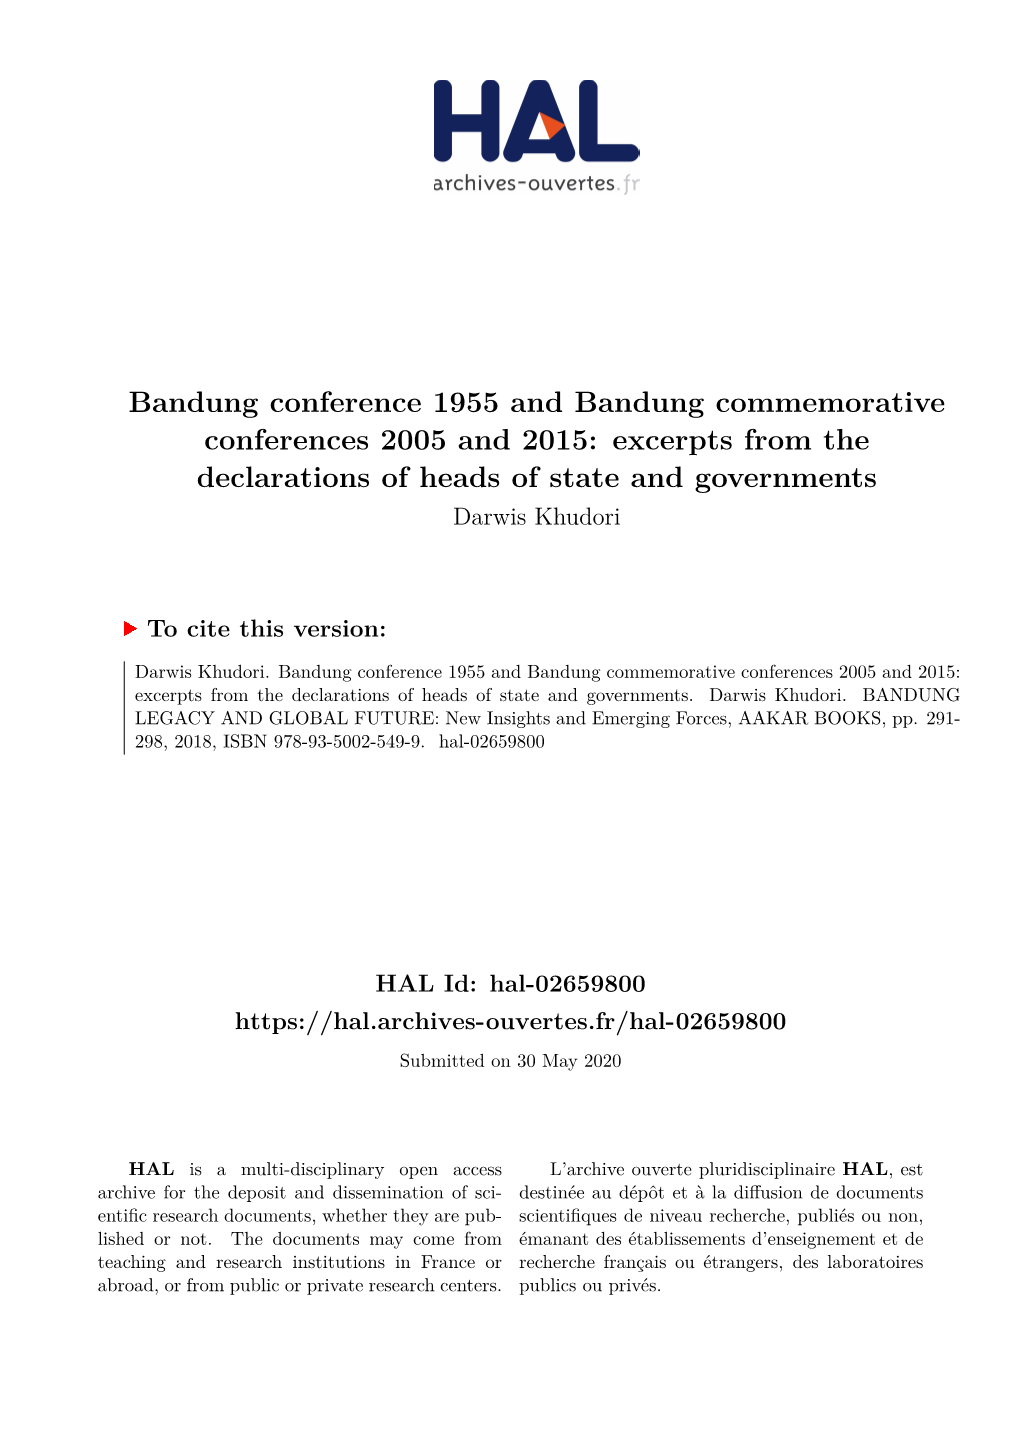 Bandung Conference 1955 and Bandung Commemorative Conferences 2005 and 2015: Excerpts from the Declarations of Heads of State and Governments Darwis Khudori